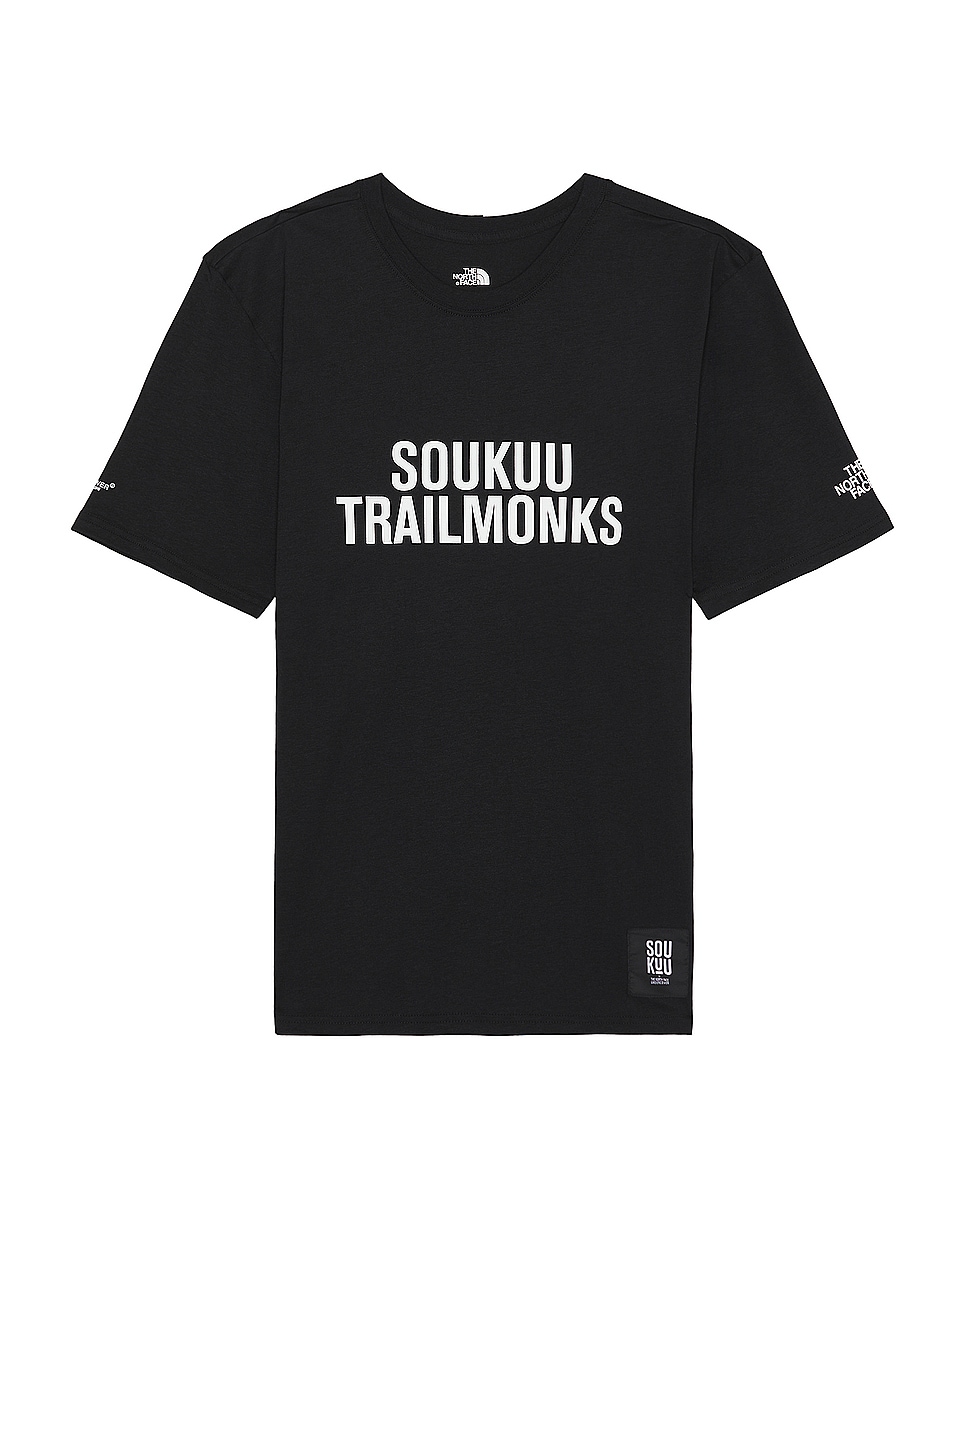 Image 1 of The North Face Soukuu Hike Technical Graphic Tee in Tnf Black